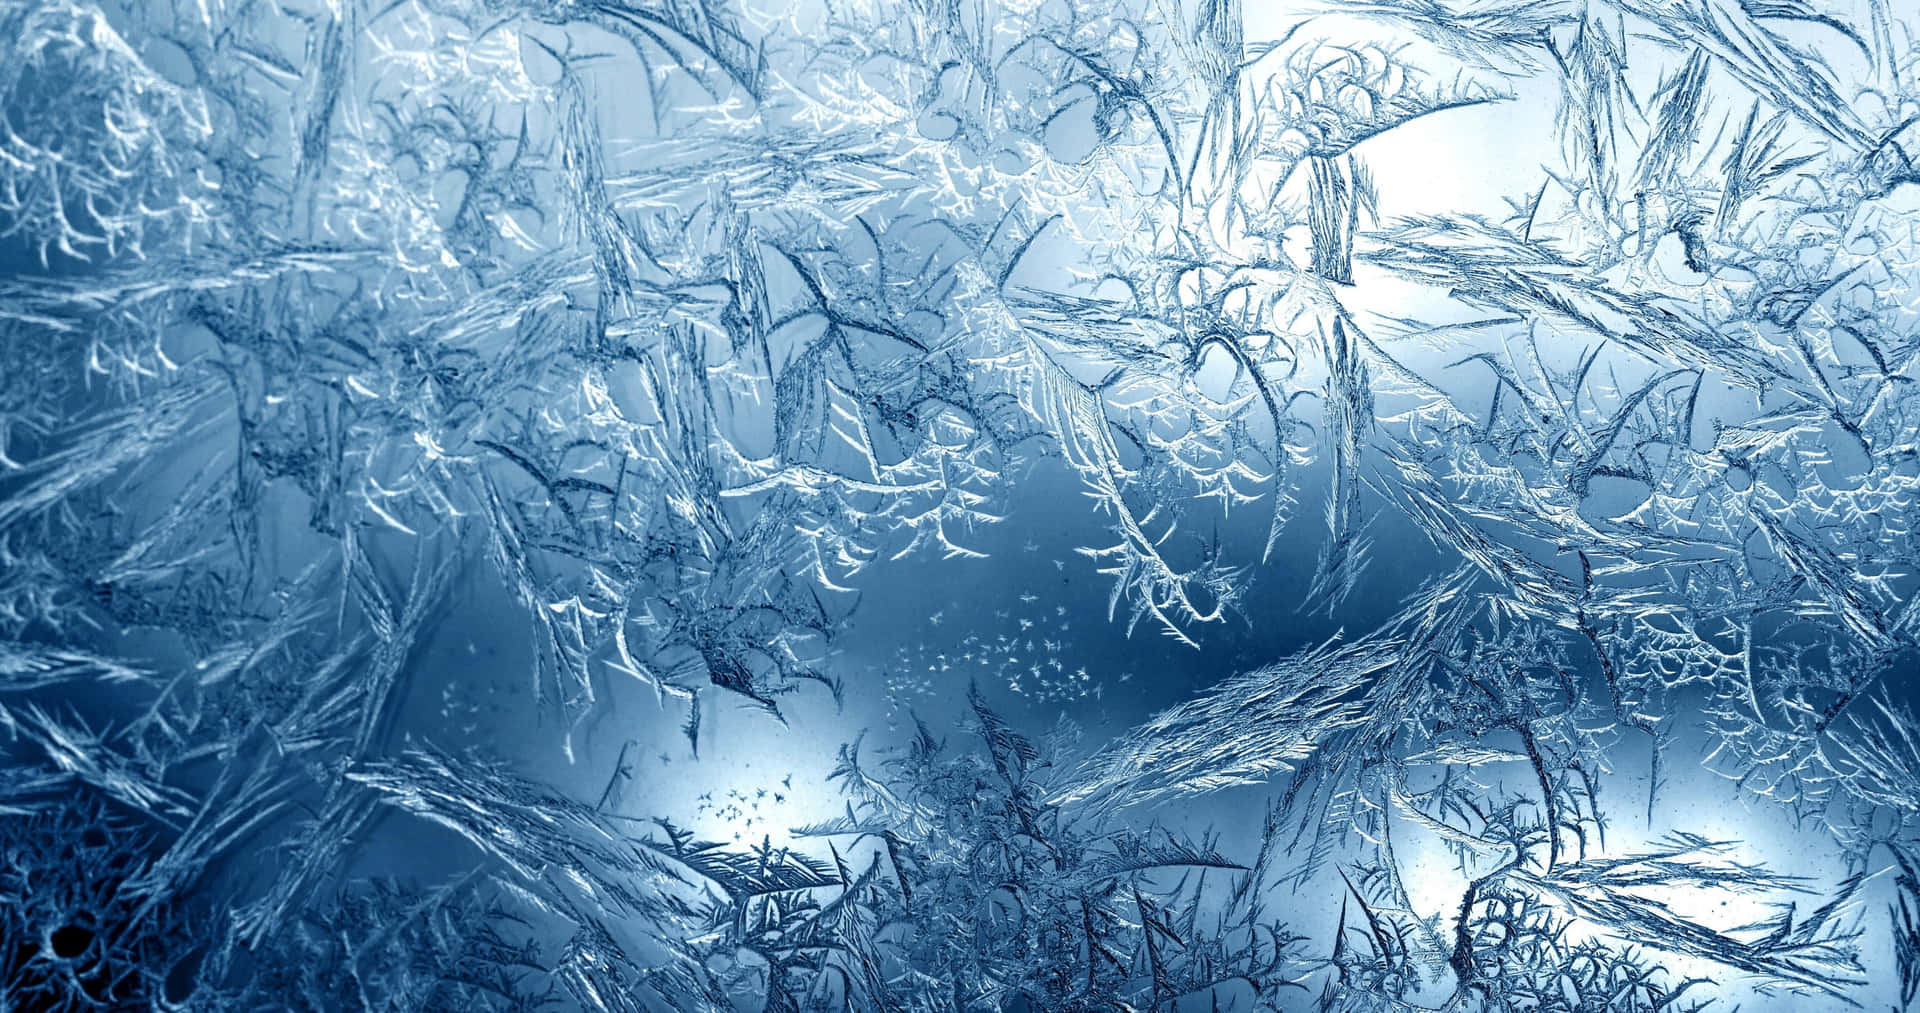 Explore the Icy Landscapes of Nature